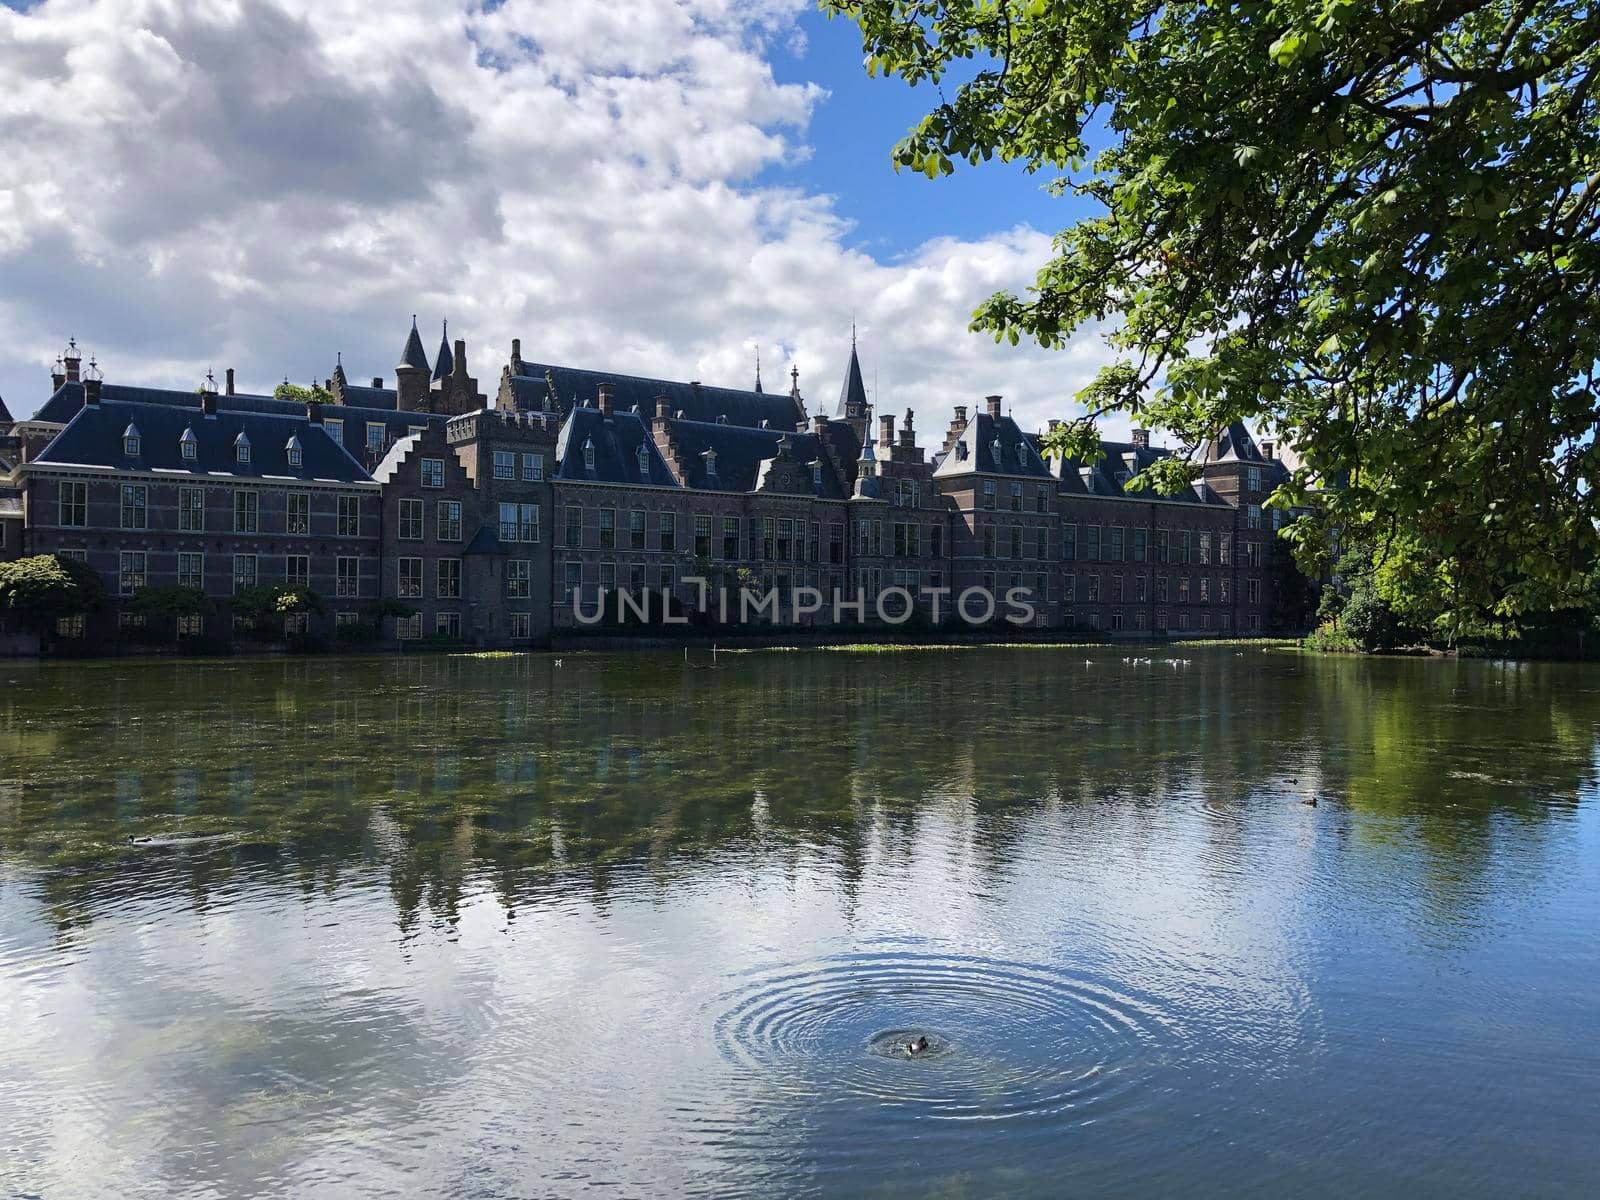 The Hofvijver in The Hague, The Netherlands